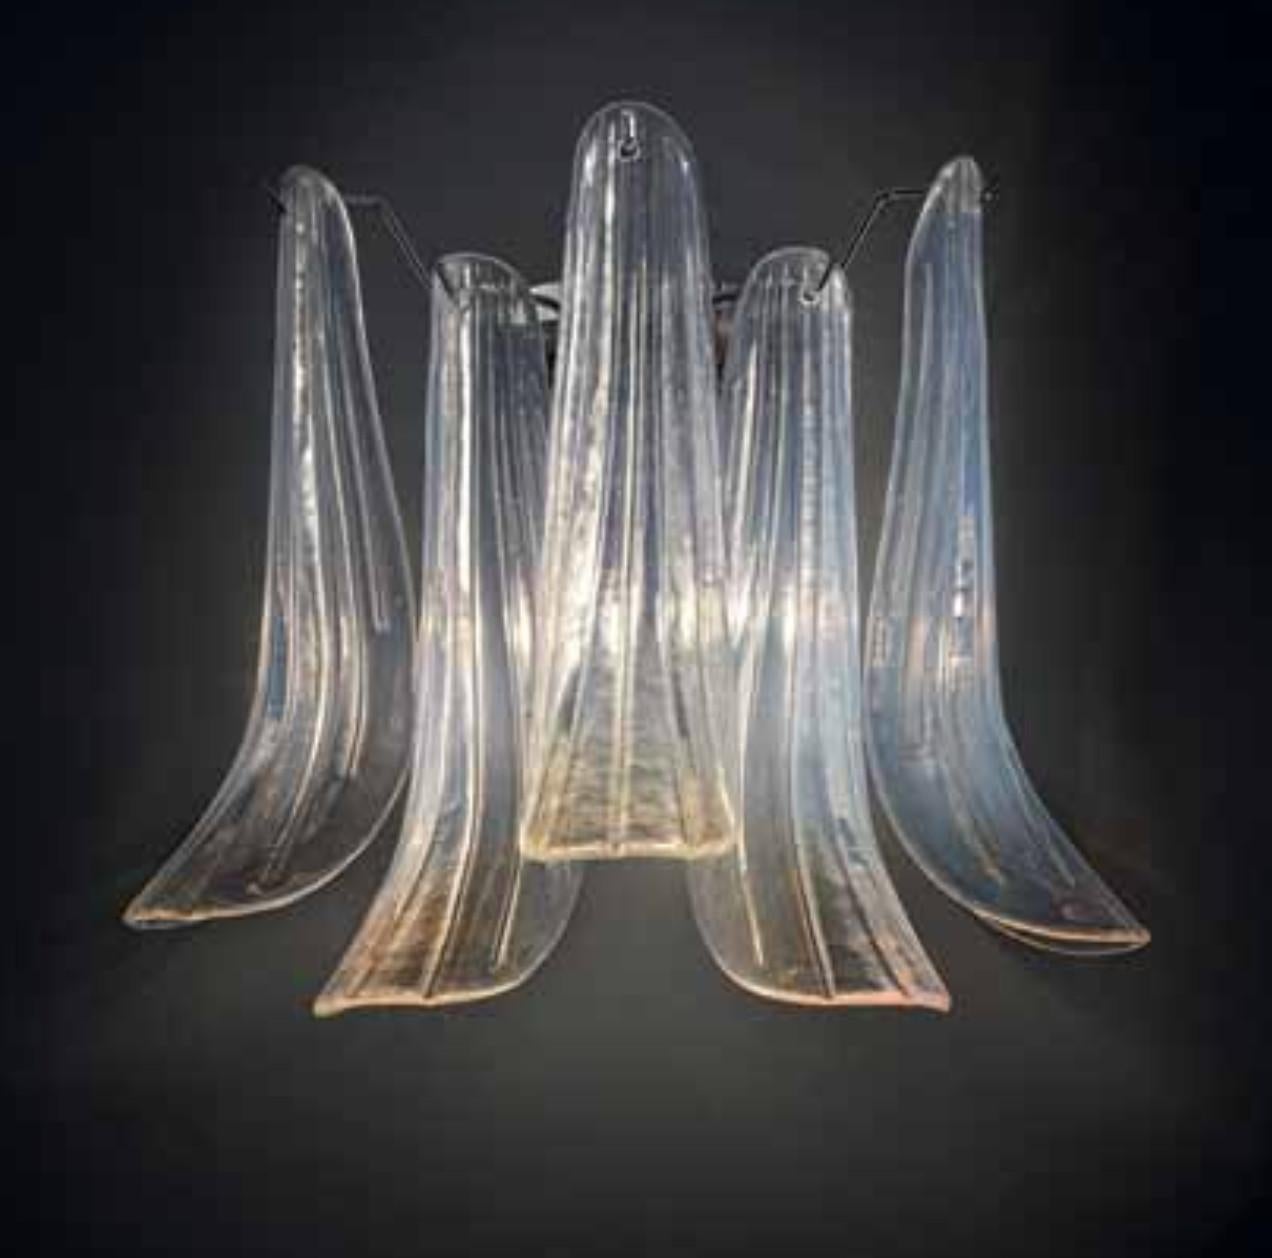 Italian wall light shown with iridescent opaline Murano banana glass petals mounted on chrome finish metal frame / inspired by Mazzega Made in Italy
Measures: width 14 inches, height 14 inches
2 lights / E12 or E14 type / max 40W each
Order only /